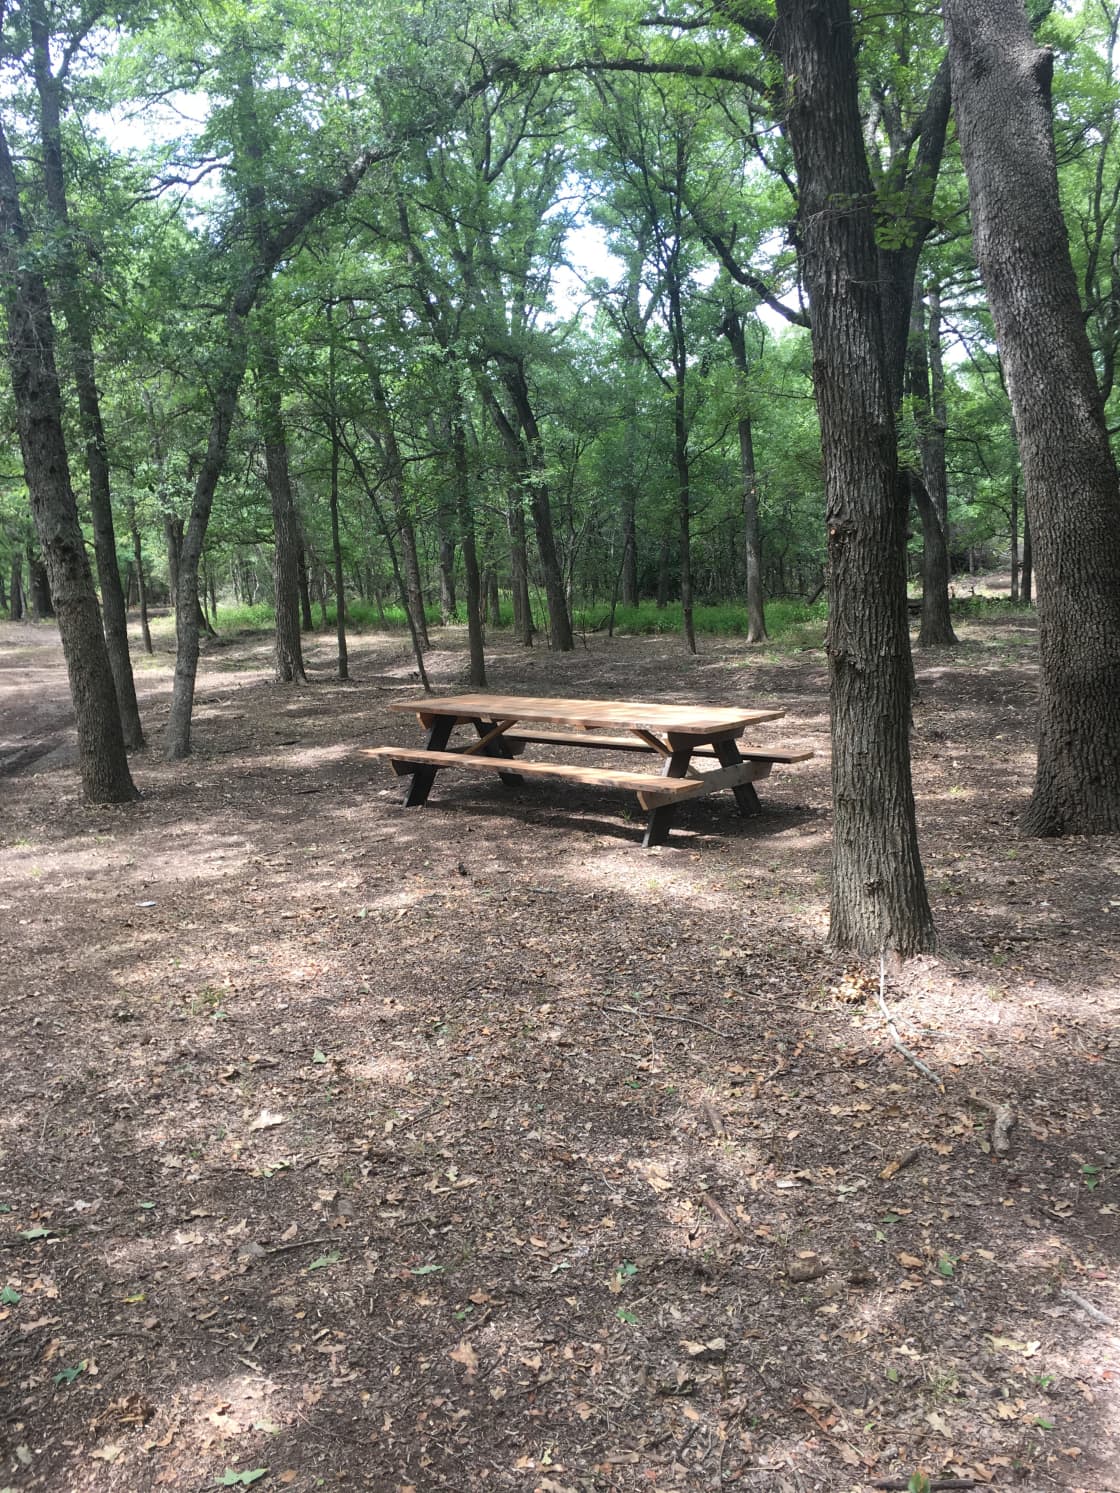 One of the many picnic and camp sites within Inez Spring Riverfront Park.